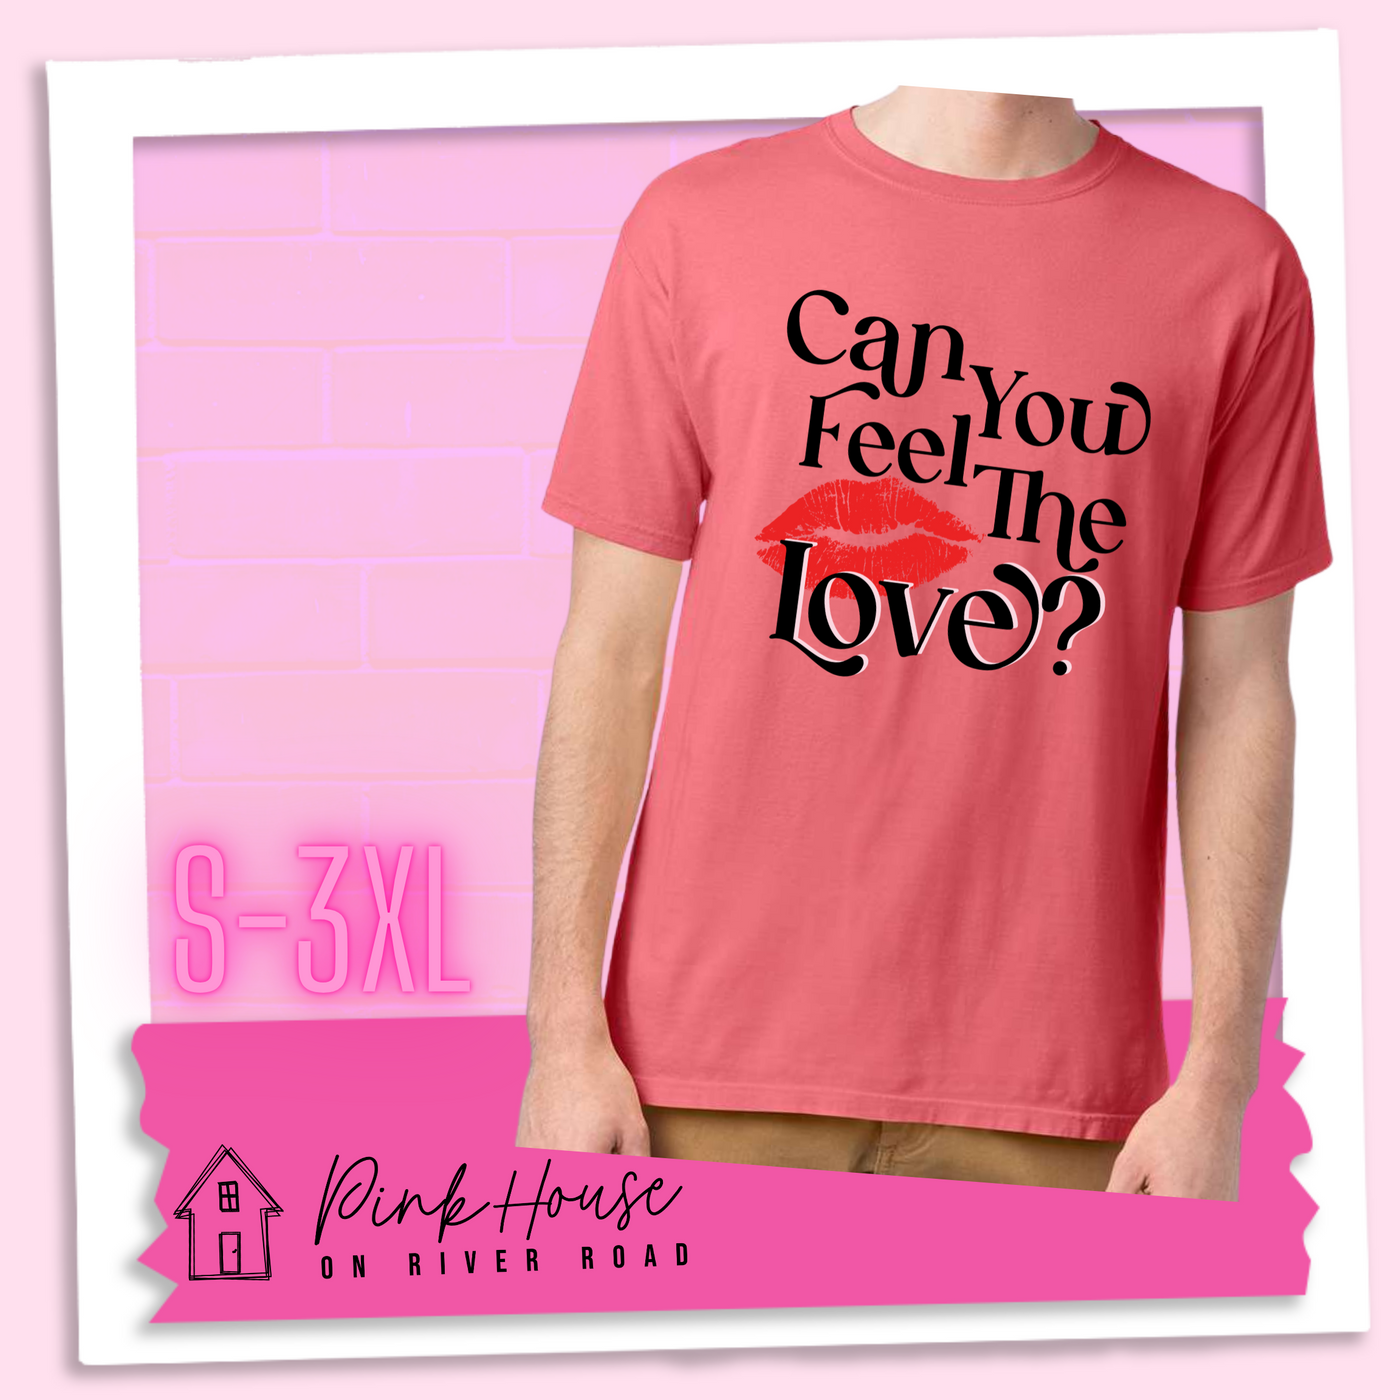 Coral Tee that says "Can you feel the love?" with a pair of red lips